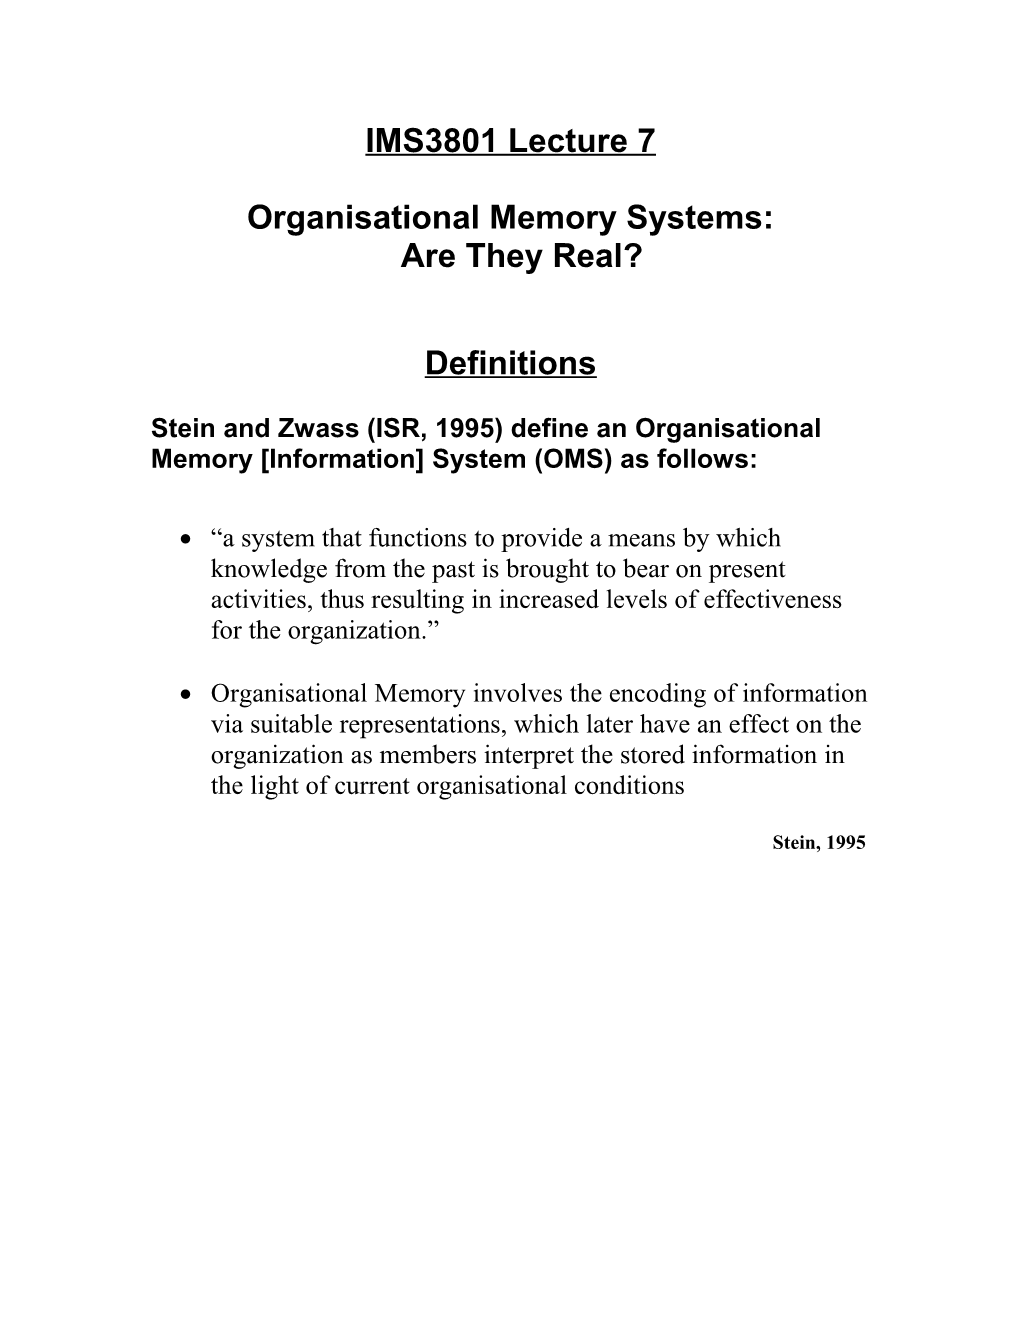 Organisational Memory Systems:Are They Real?